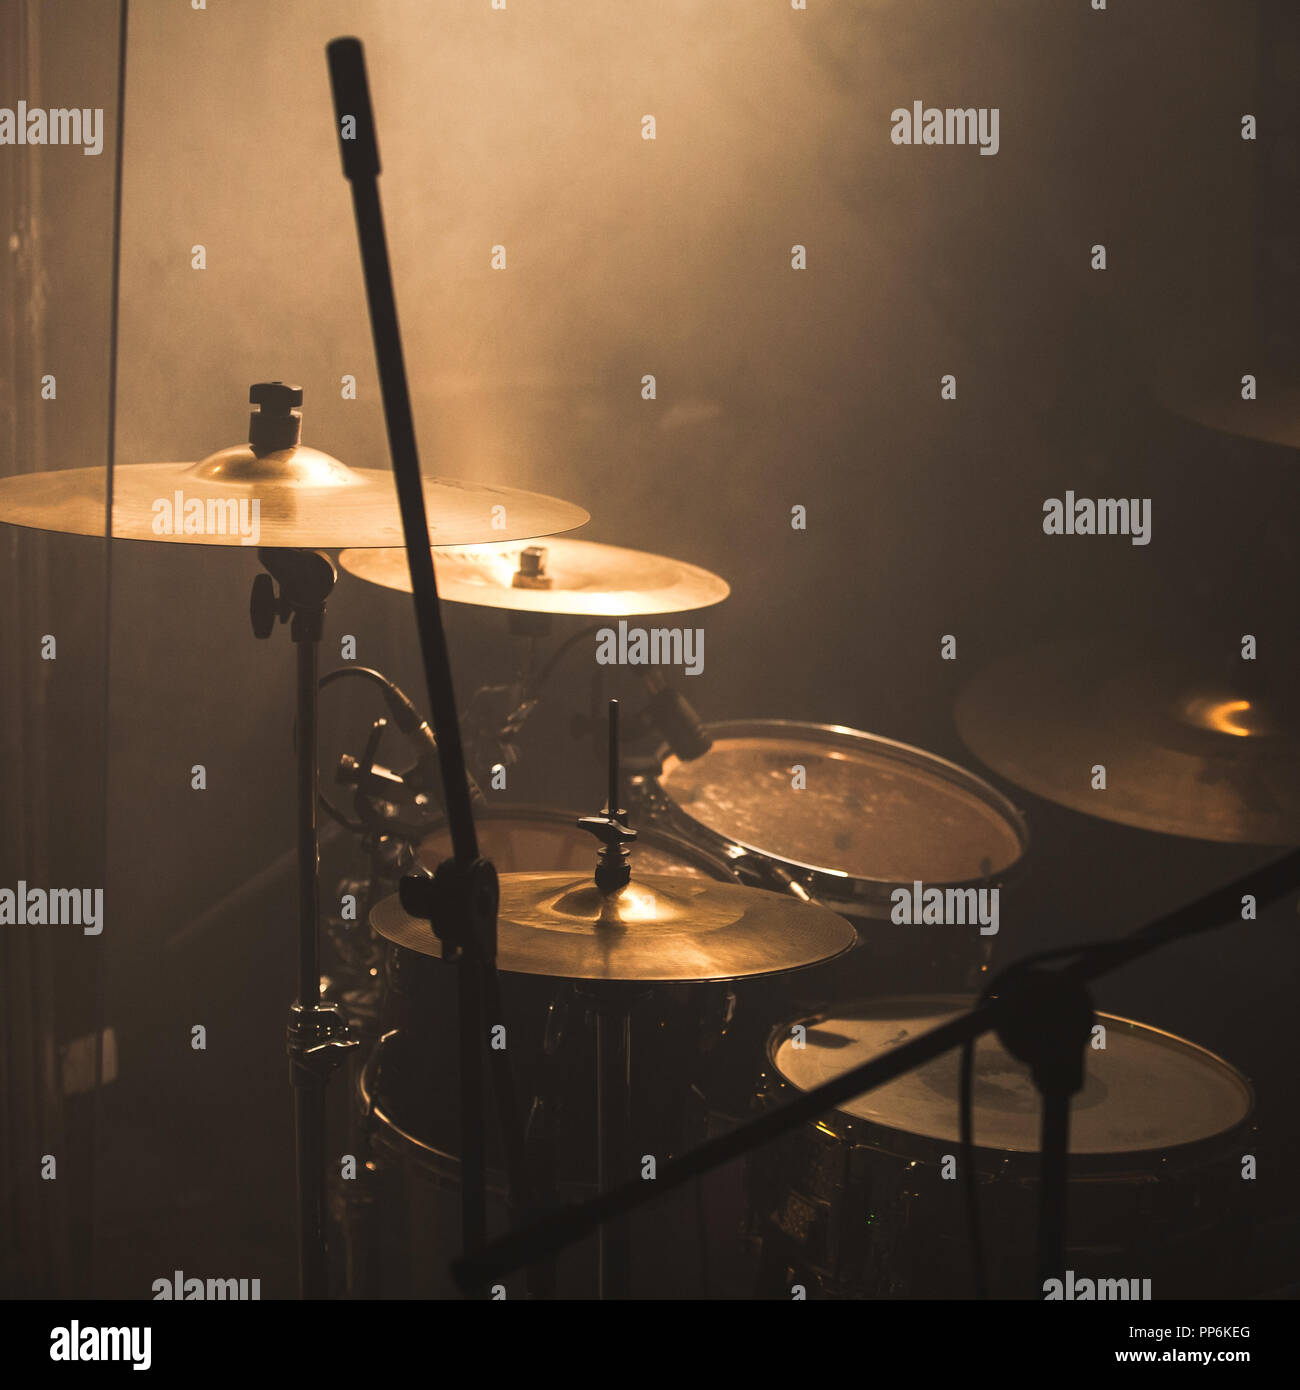 Live music theme, rock band drum set with cymbals Stock Photo